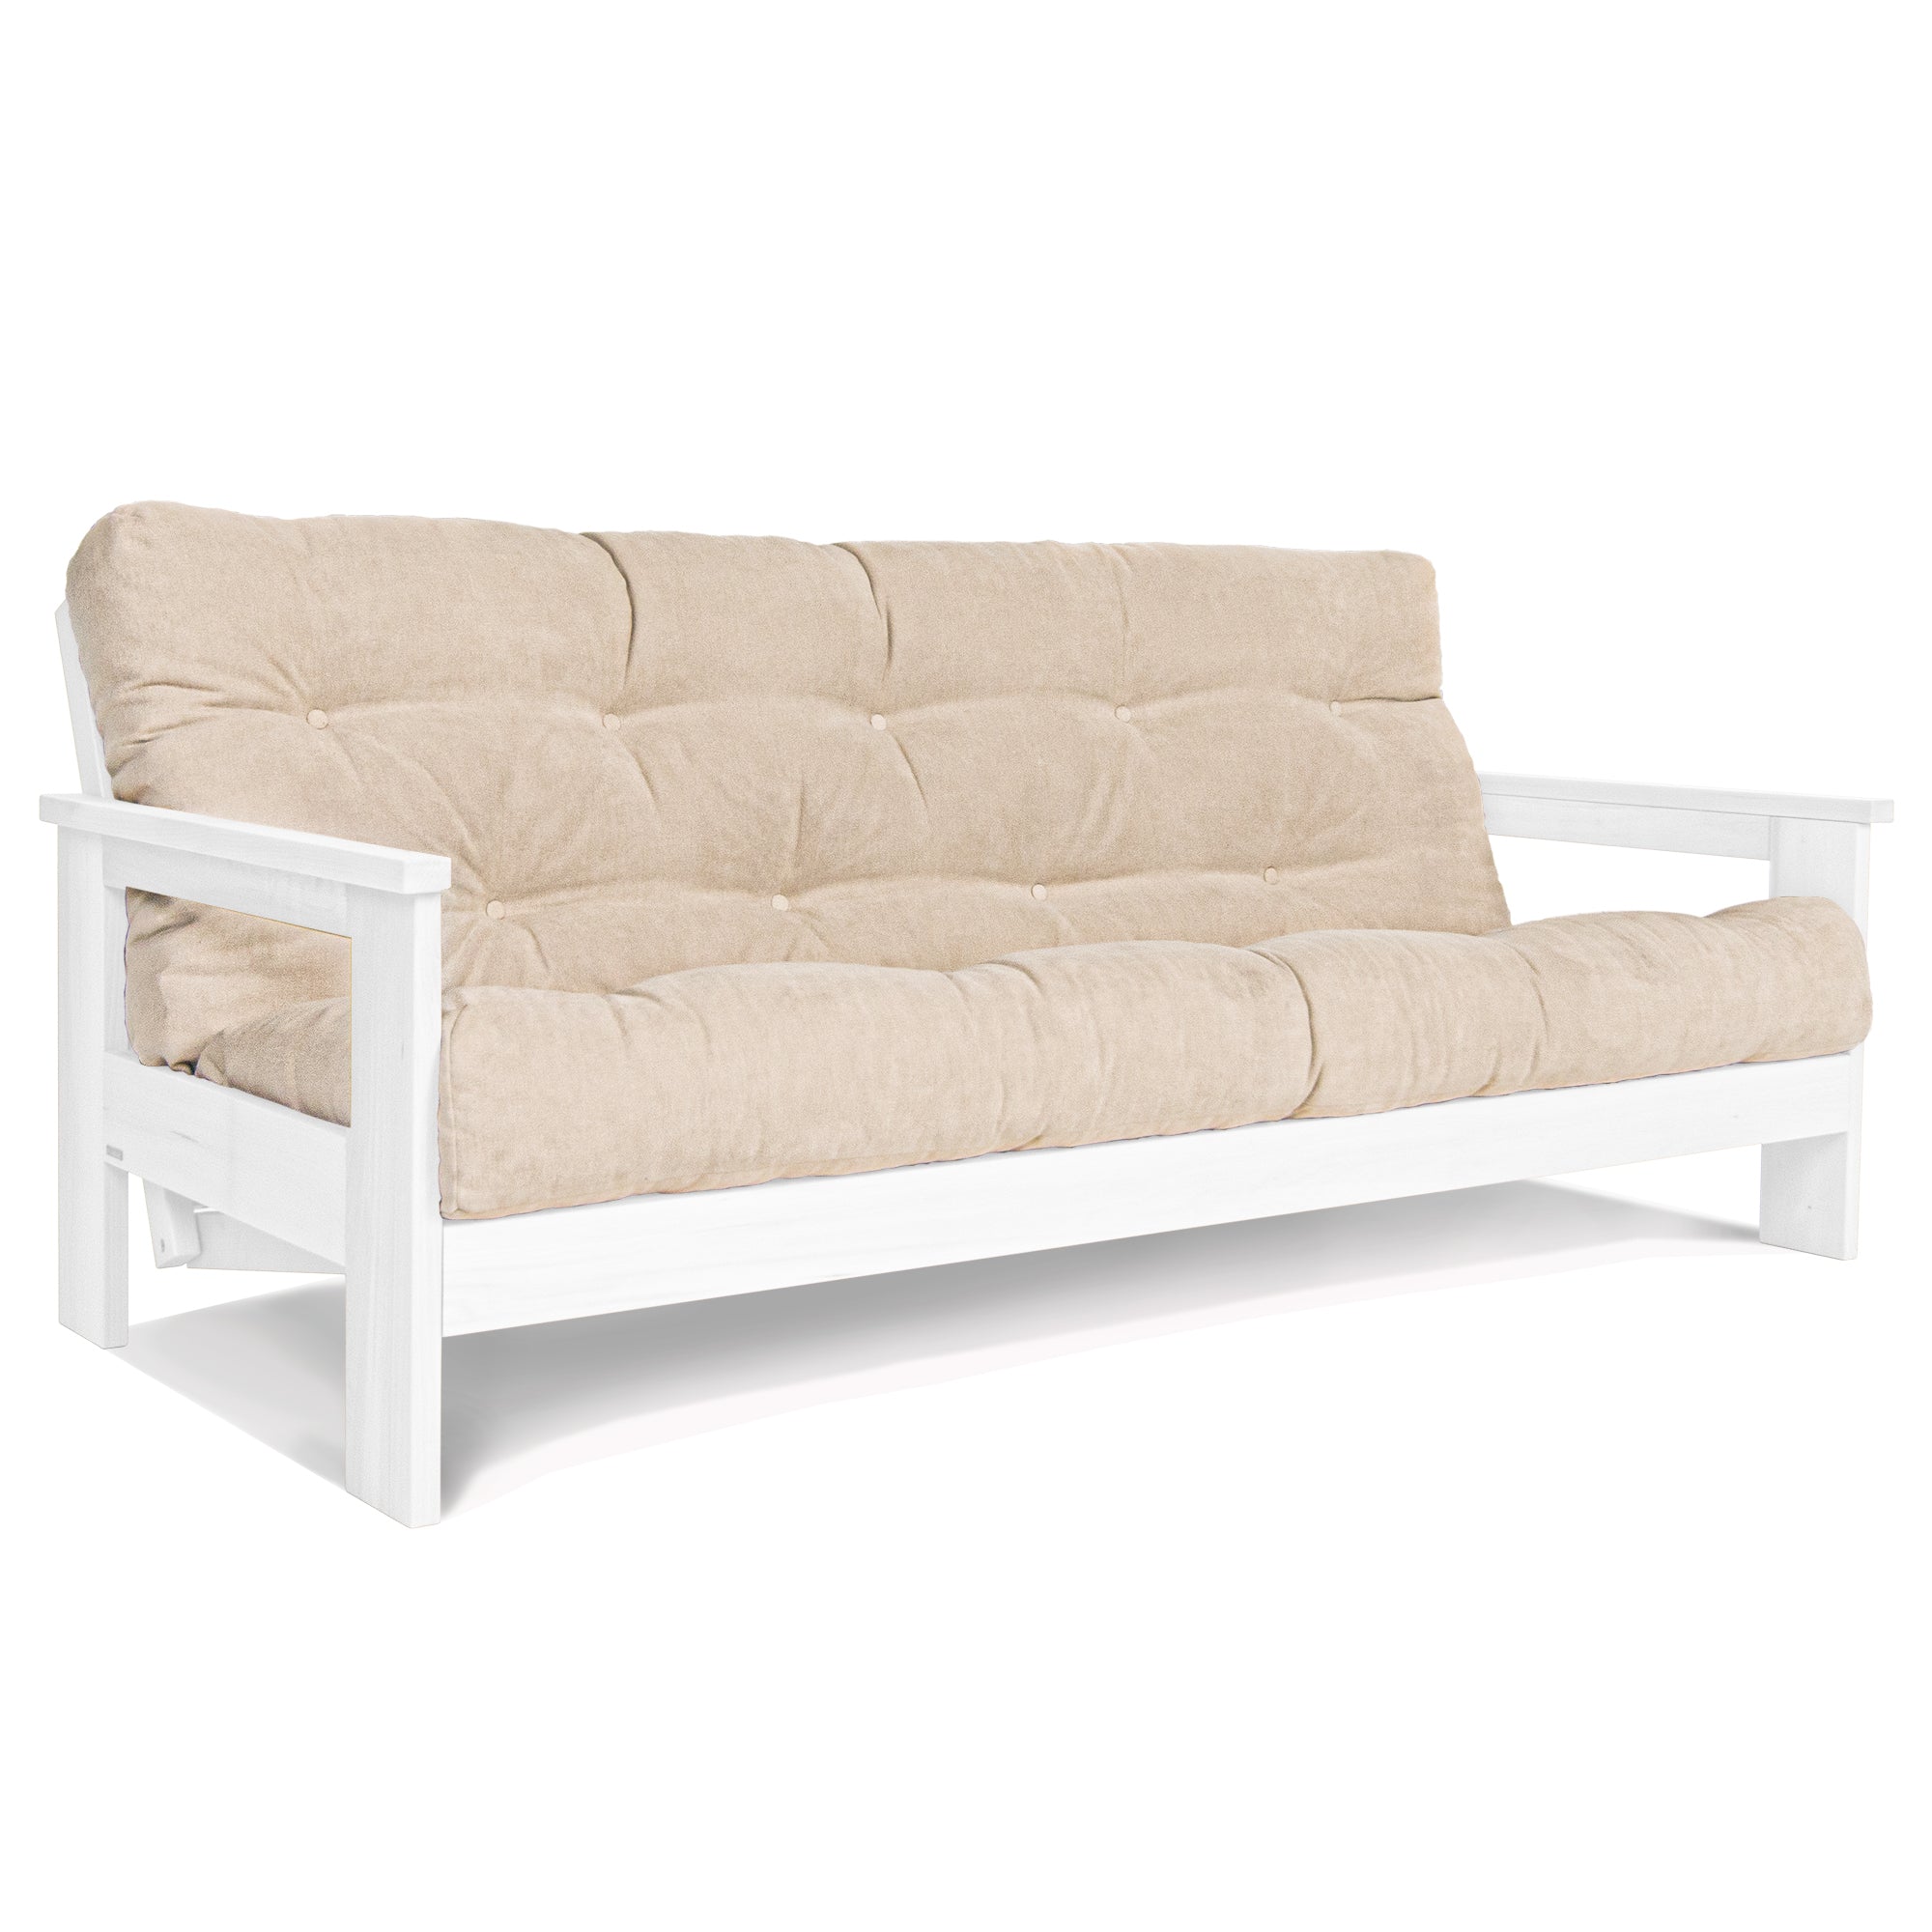 MEXICO Folding Sofa Bed-Beech Wood Frame White-creamy fabric colour MEXICO Folding Sofa Bed, Beech Wood Frame, White Colour-creamy fabric